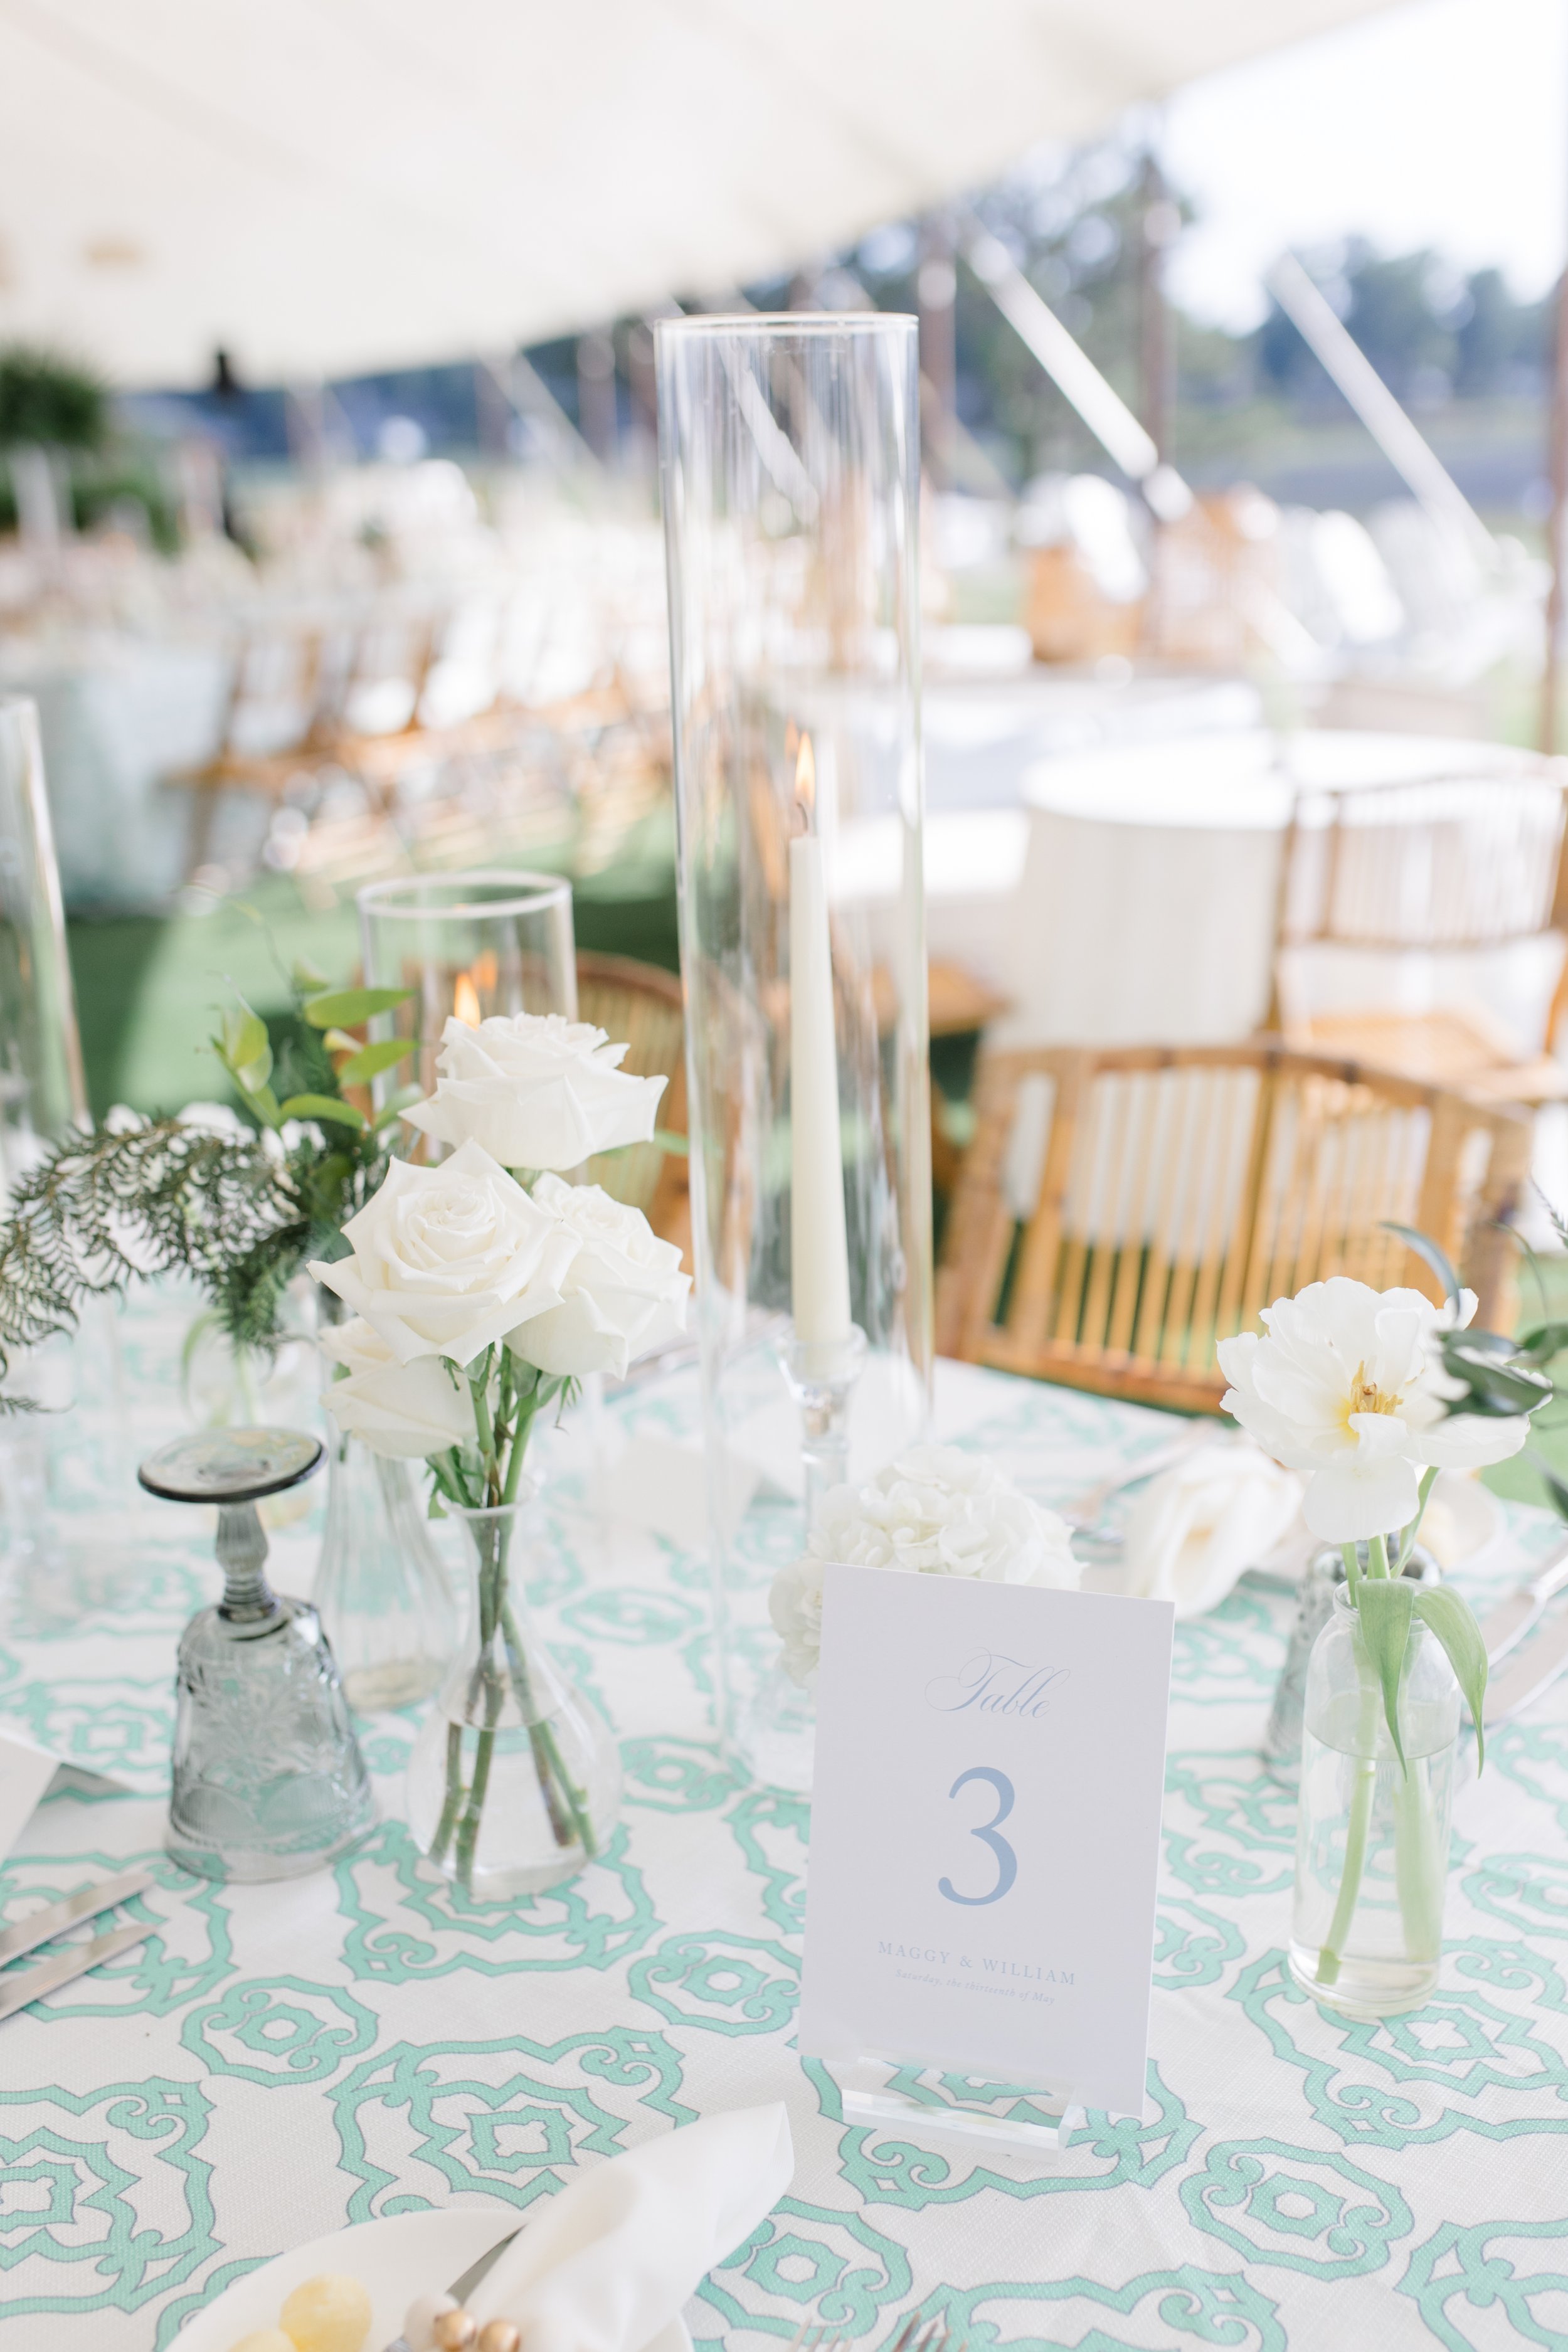 a-southern-chic-south-carolina-wedding-at-the-colleton-river-club-featuring-sophisticated-modern-florals-designed-by-savannah-florist-ivory-and-beau-32.jpg